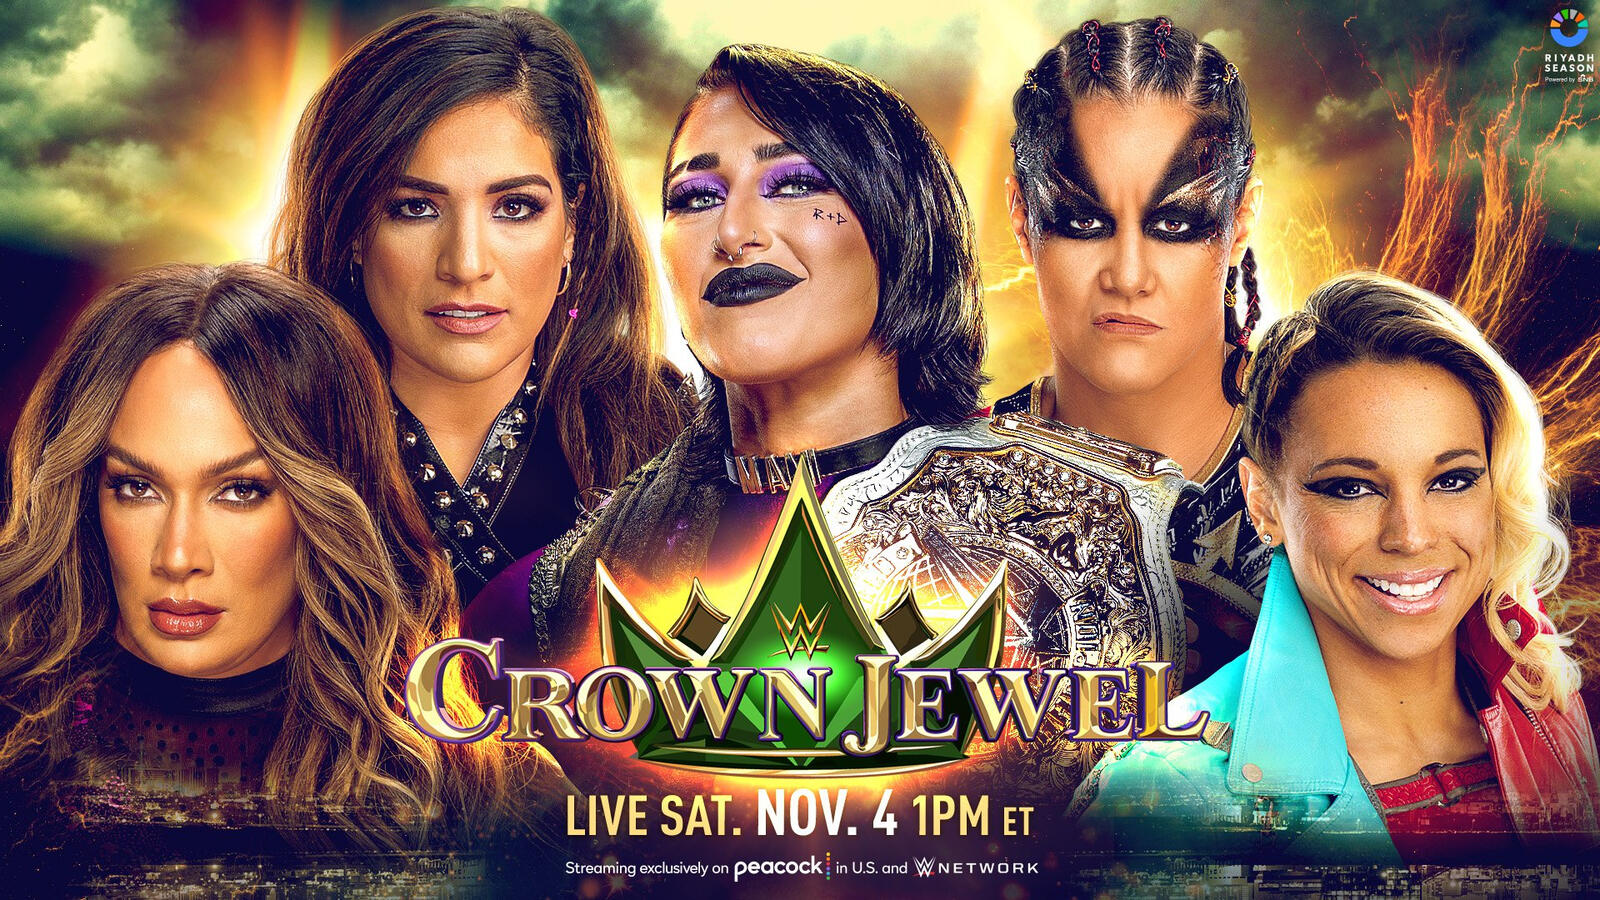 Big Fatal 5Way Match for the WWE Women's World Championship set for